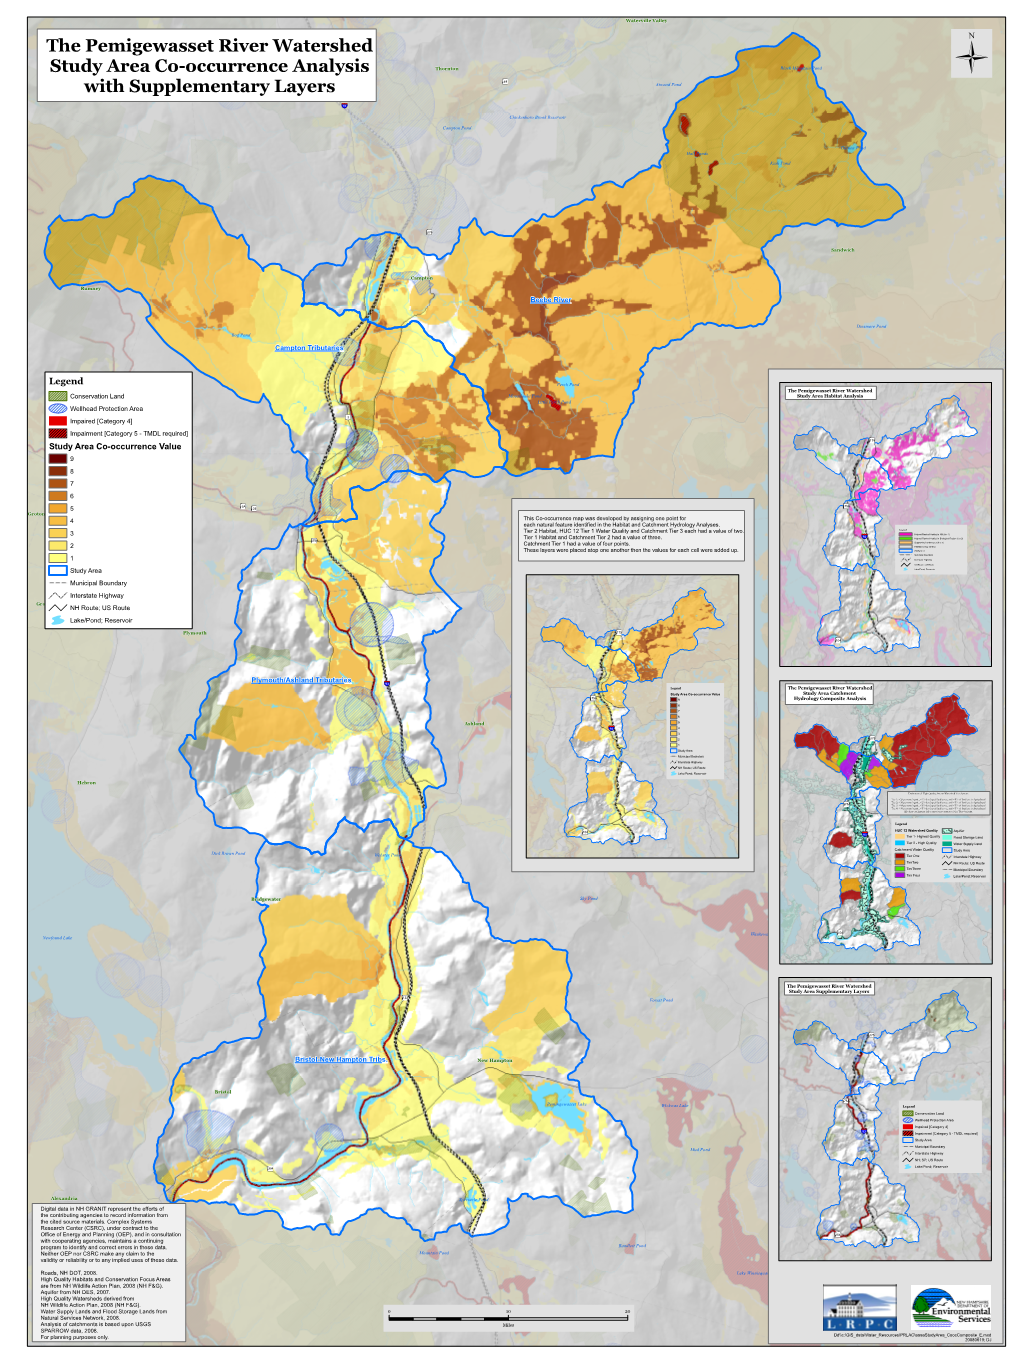 The Pemigewasset River Watershed Study Area Co-Occurrence Analysis